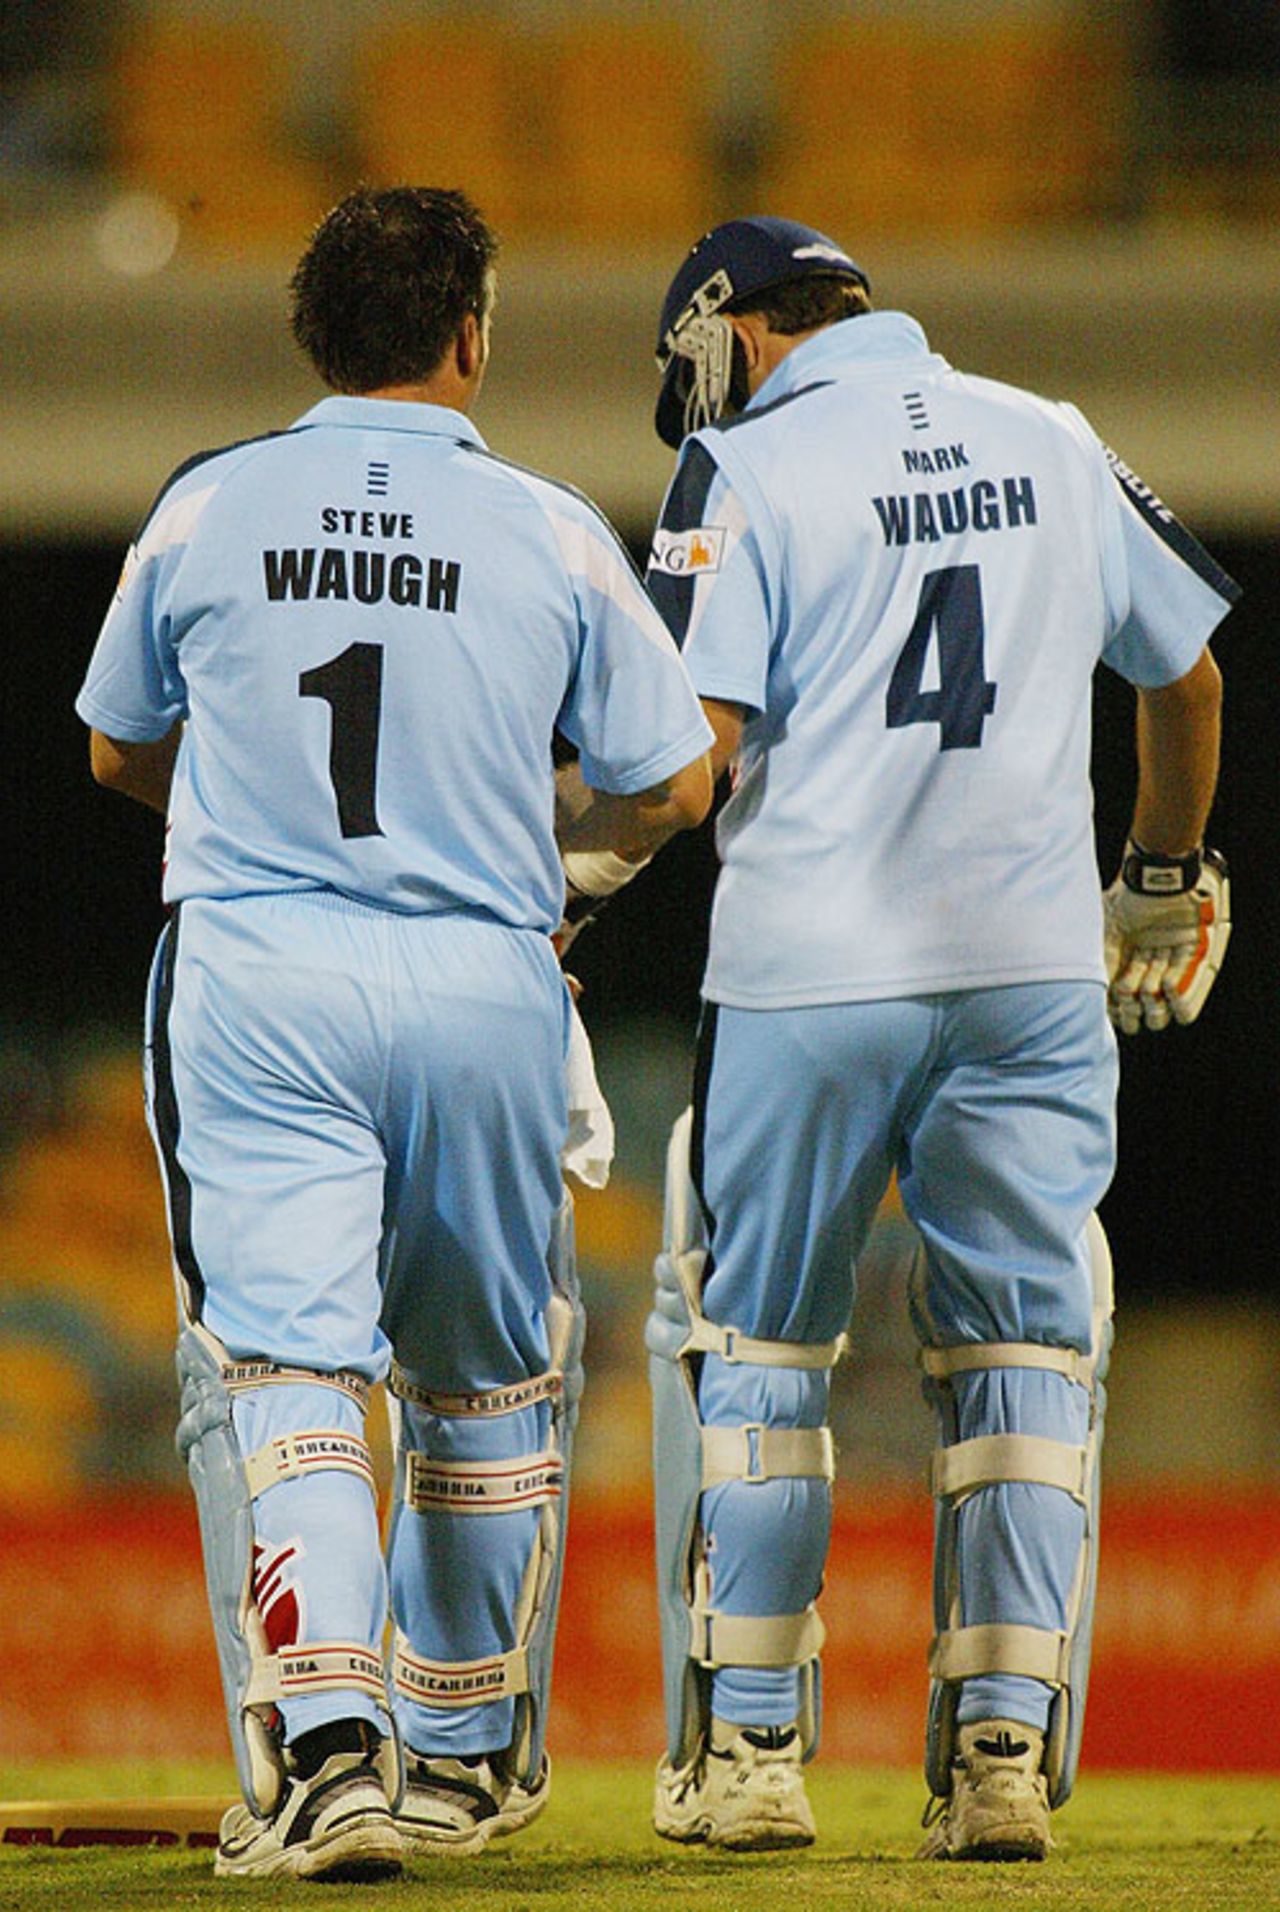 The Waugh twins in action for the NSW Blues, Queensland Bulls v New South Wales Blues, ING Cup, Brisbane, January 30, 2004